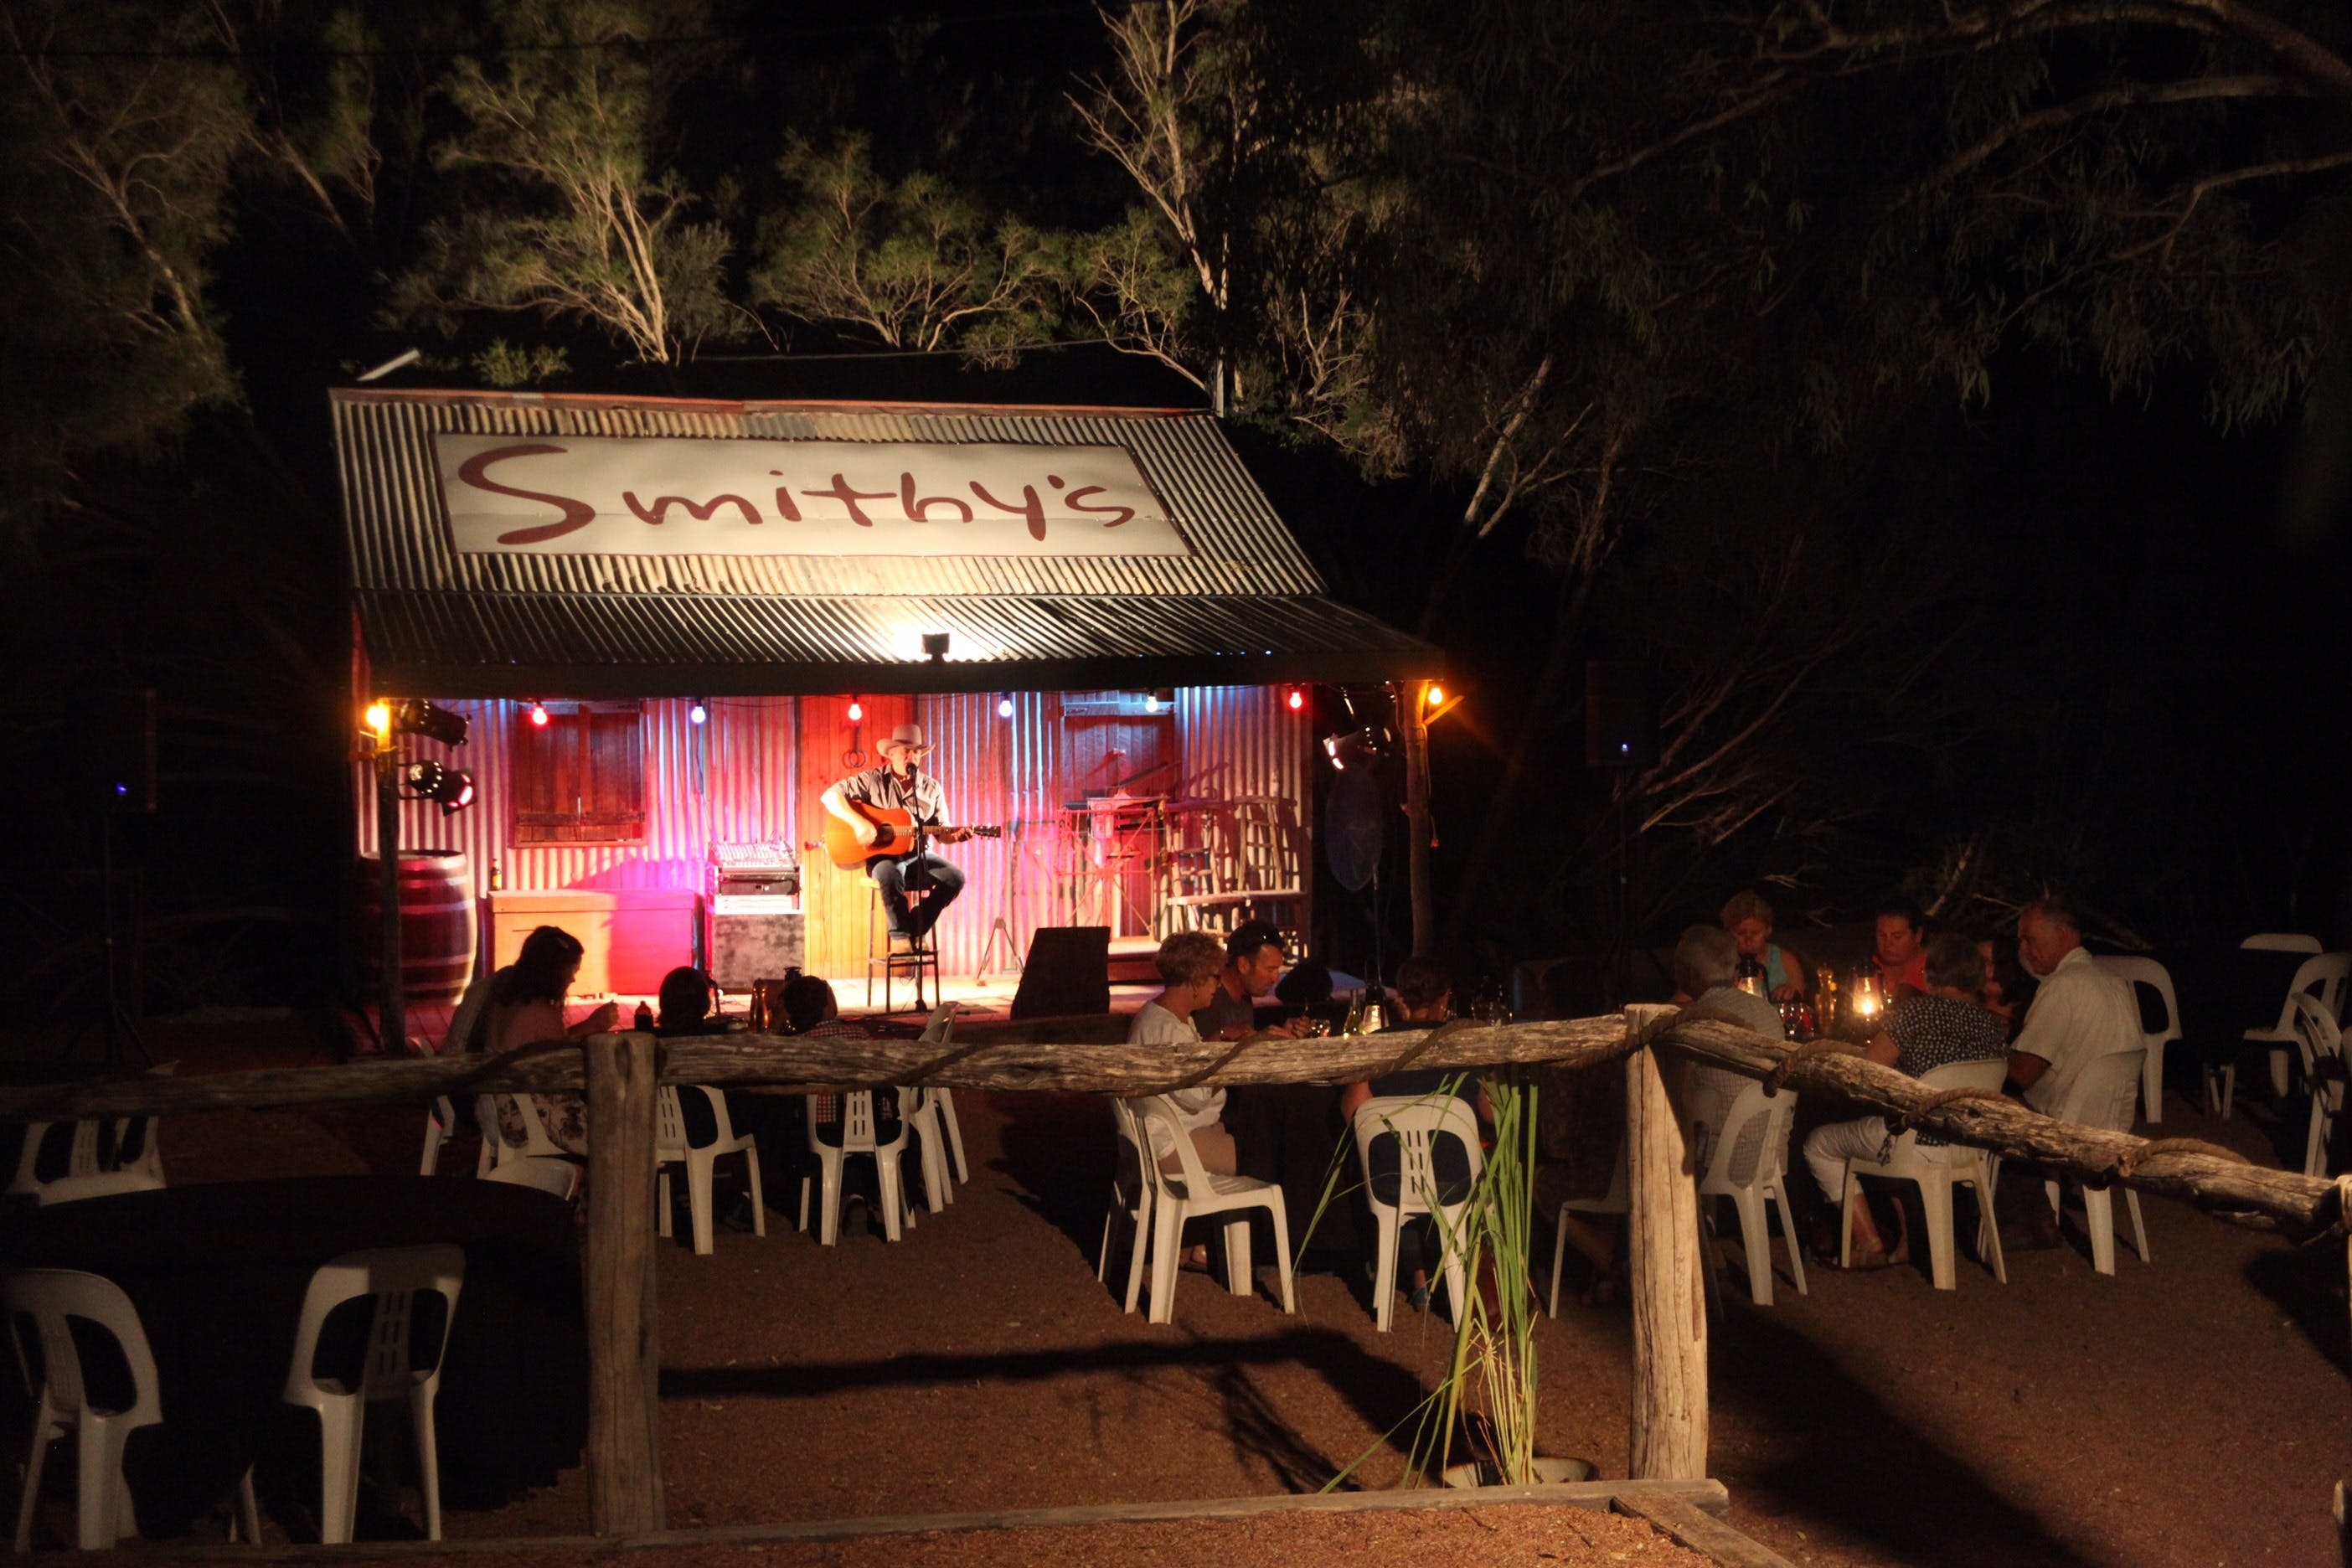 Smithy's Outback Dinner and Show - Australia Accommodation